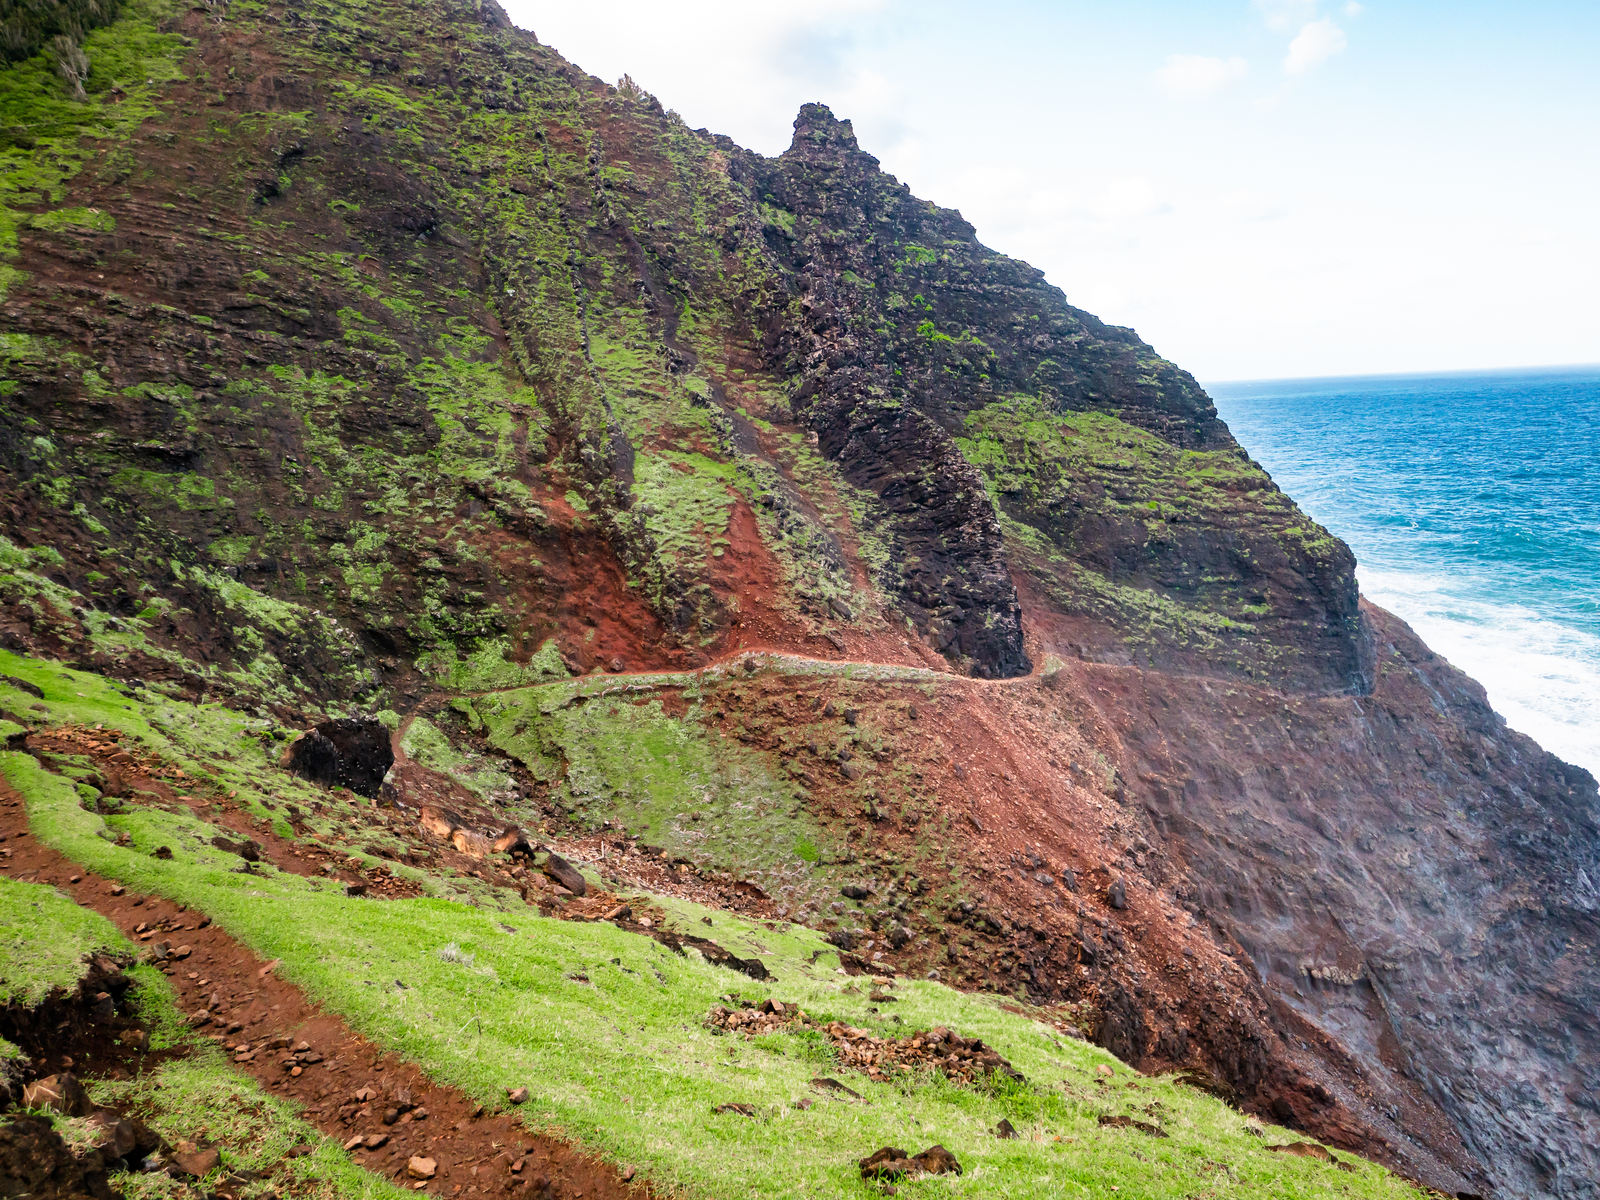 Hiking along the undeveloped trail of Kalalau Trail beside the famous Na Pali Coast, is one of the best things to do in Kauai